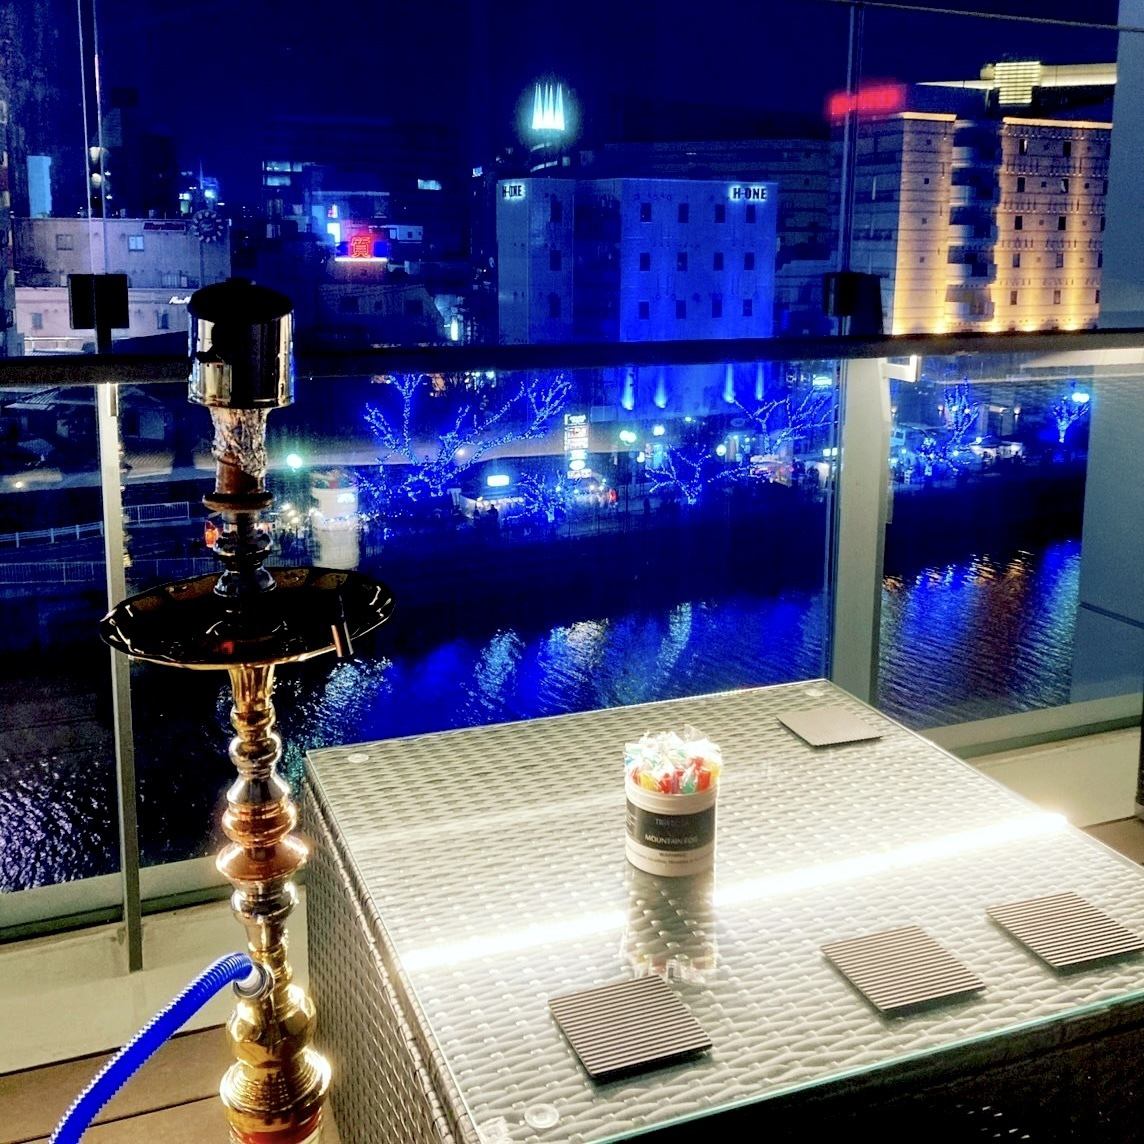 How about a date where you can enjoy shisha while enjoying the night view?